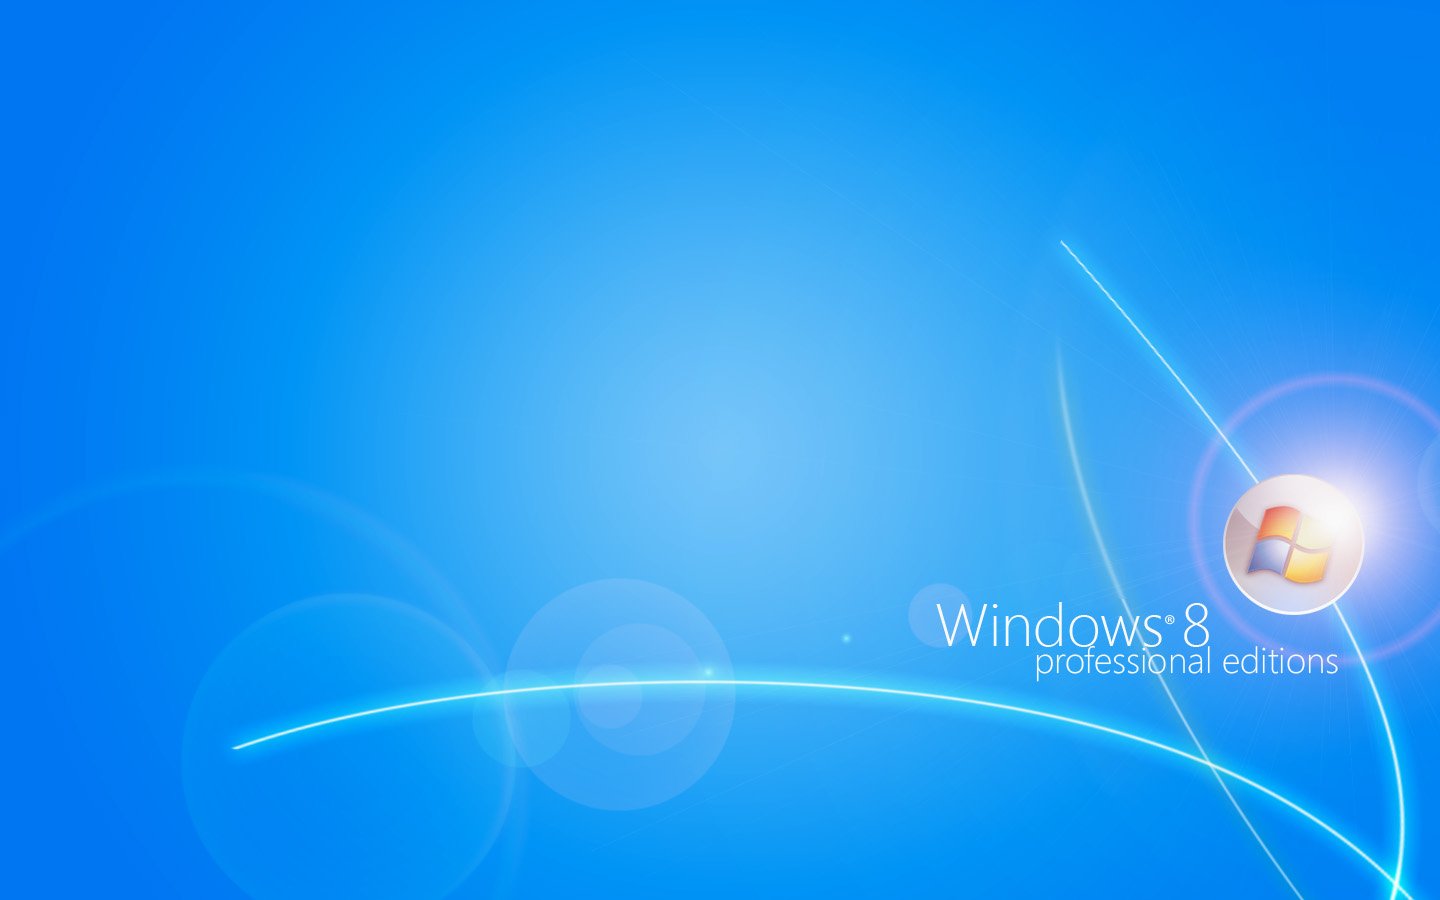 Download these HD Windows Wallpaper Images × Windows 